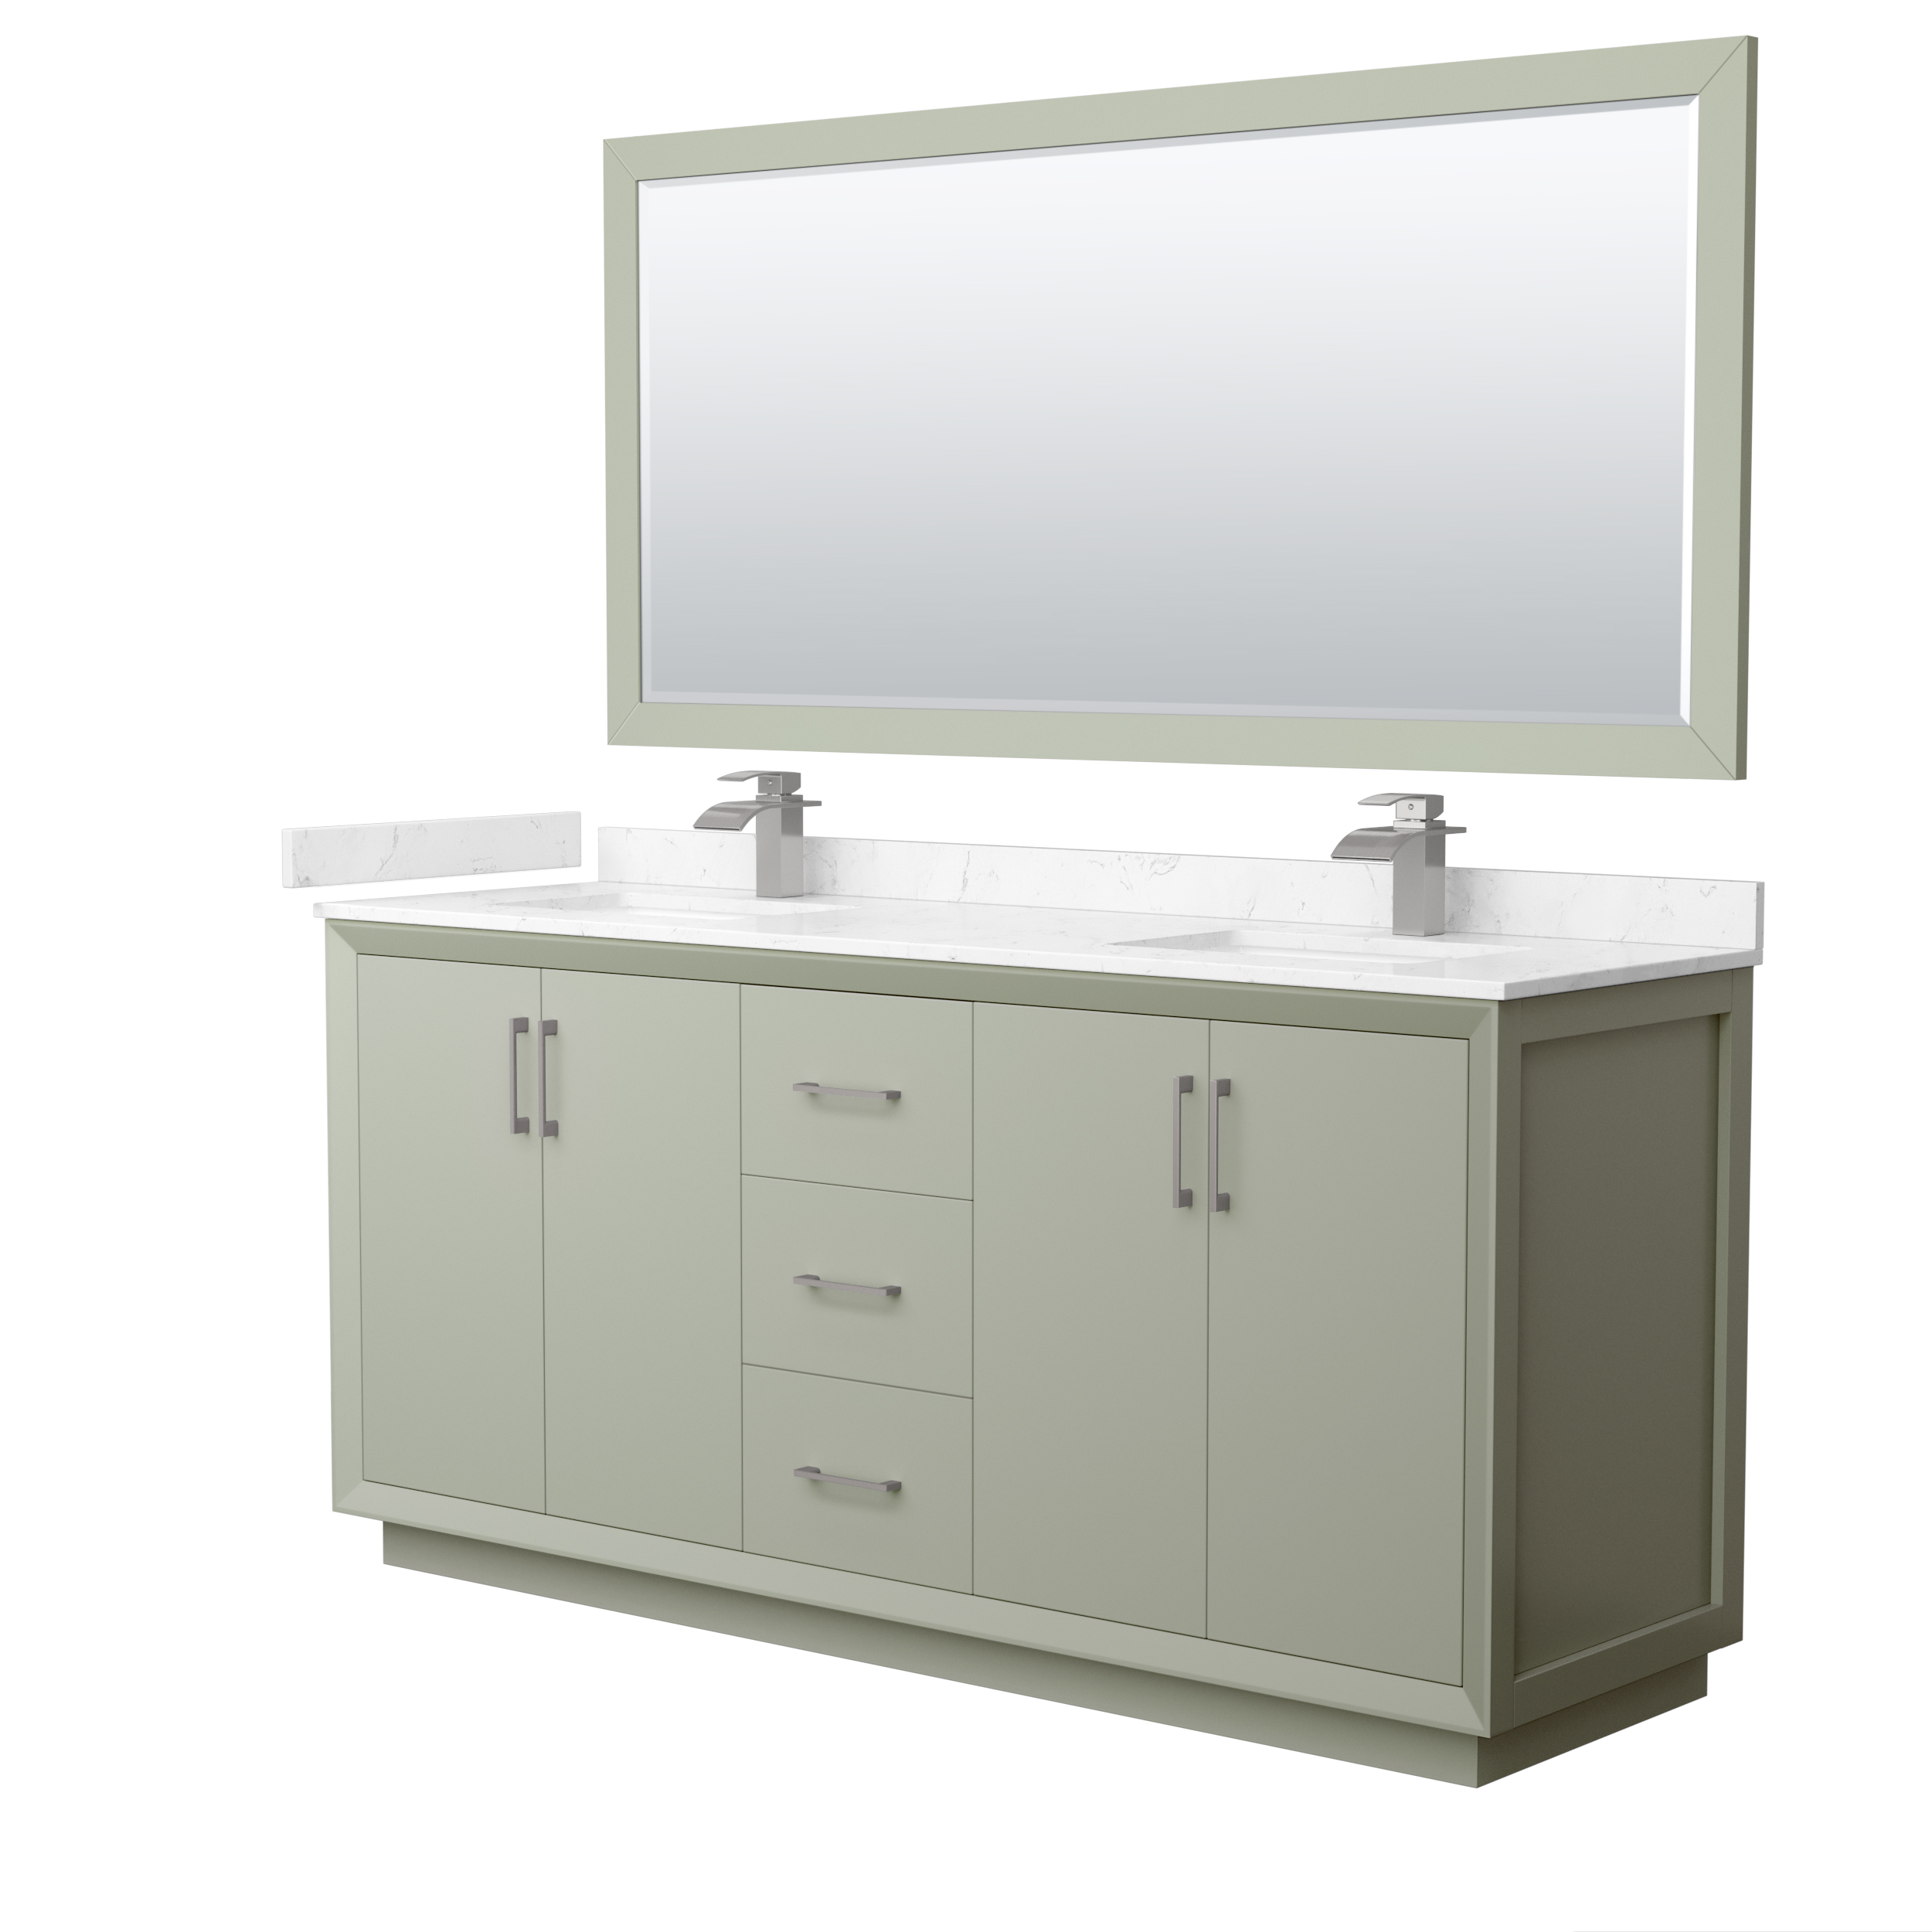 72" Transitional Double Vanity Base in Light Green, 3 Top Options, with 3 Hardware Options and Mirror Option